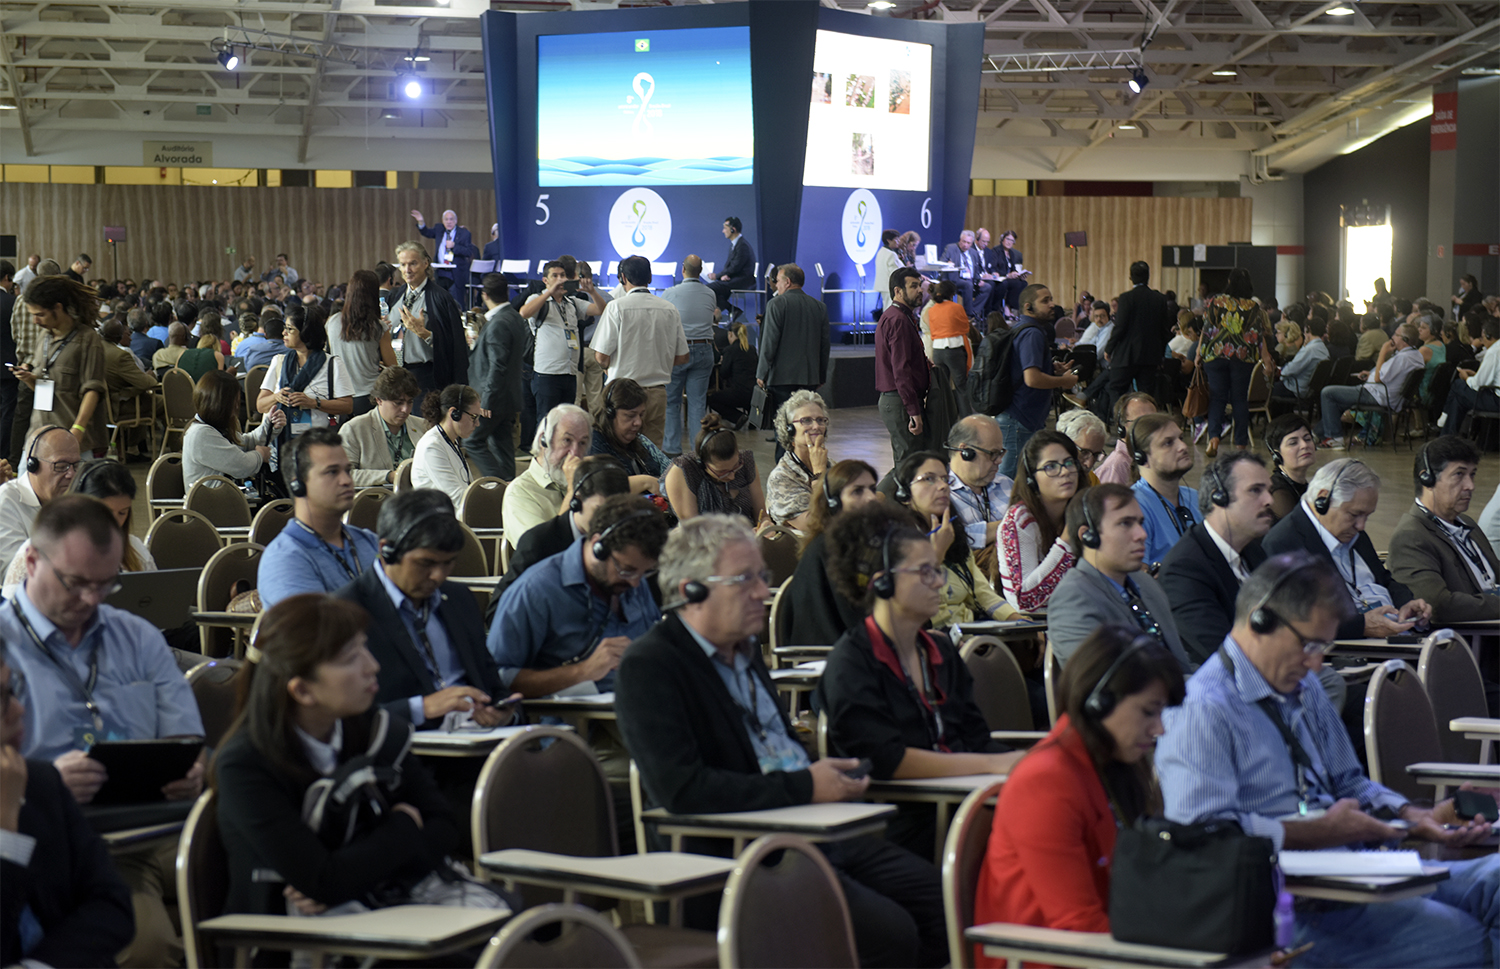 The 8th edition of the World Water Forum was held 2018 in Brasilia, Brazil from 19-23 March 2018. Photo Sergio Amaral.